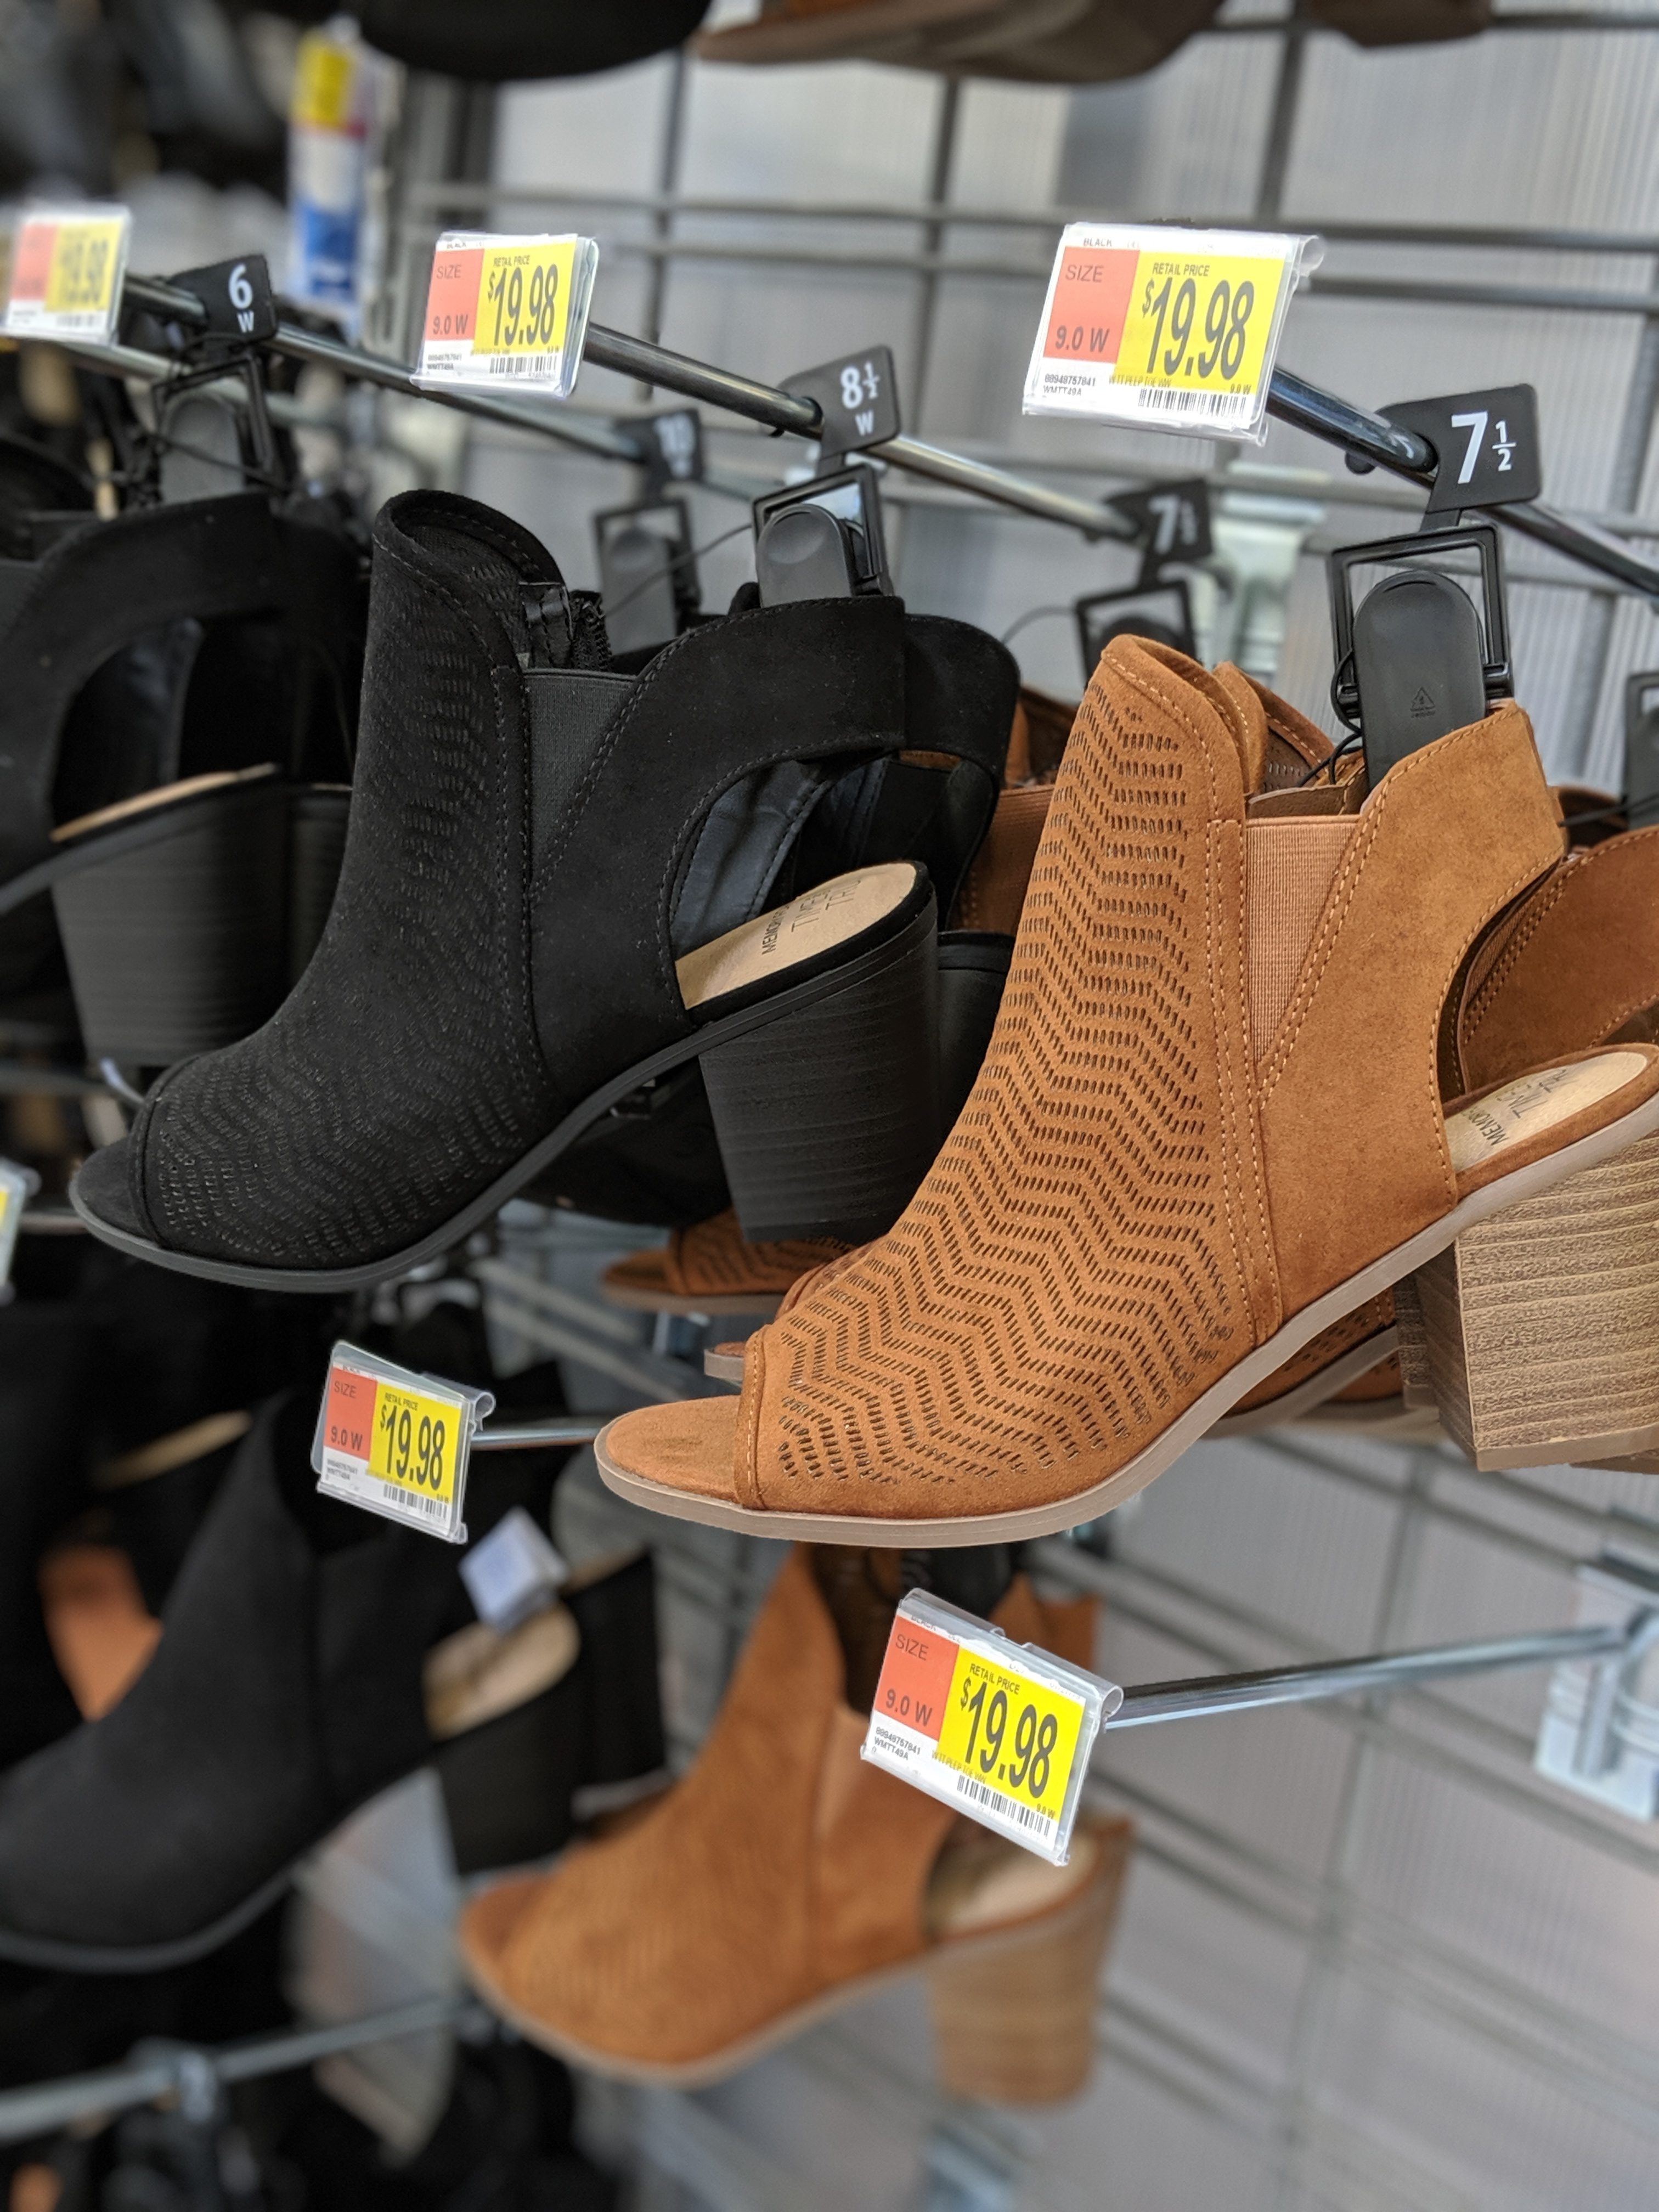 Walmart Try On Haul Fall 2019 - Fall 2019 Walmart finds with fashion blogger Tricia Nibarger of COVET by tricia. Lots of cute finds in this Walmart try on, including designer dupes, leopard print galore, and lots more. #walmart #walmartfashion #tryon #haul 